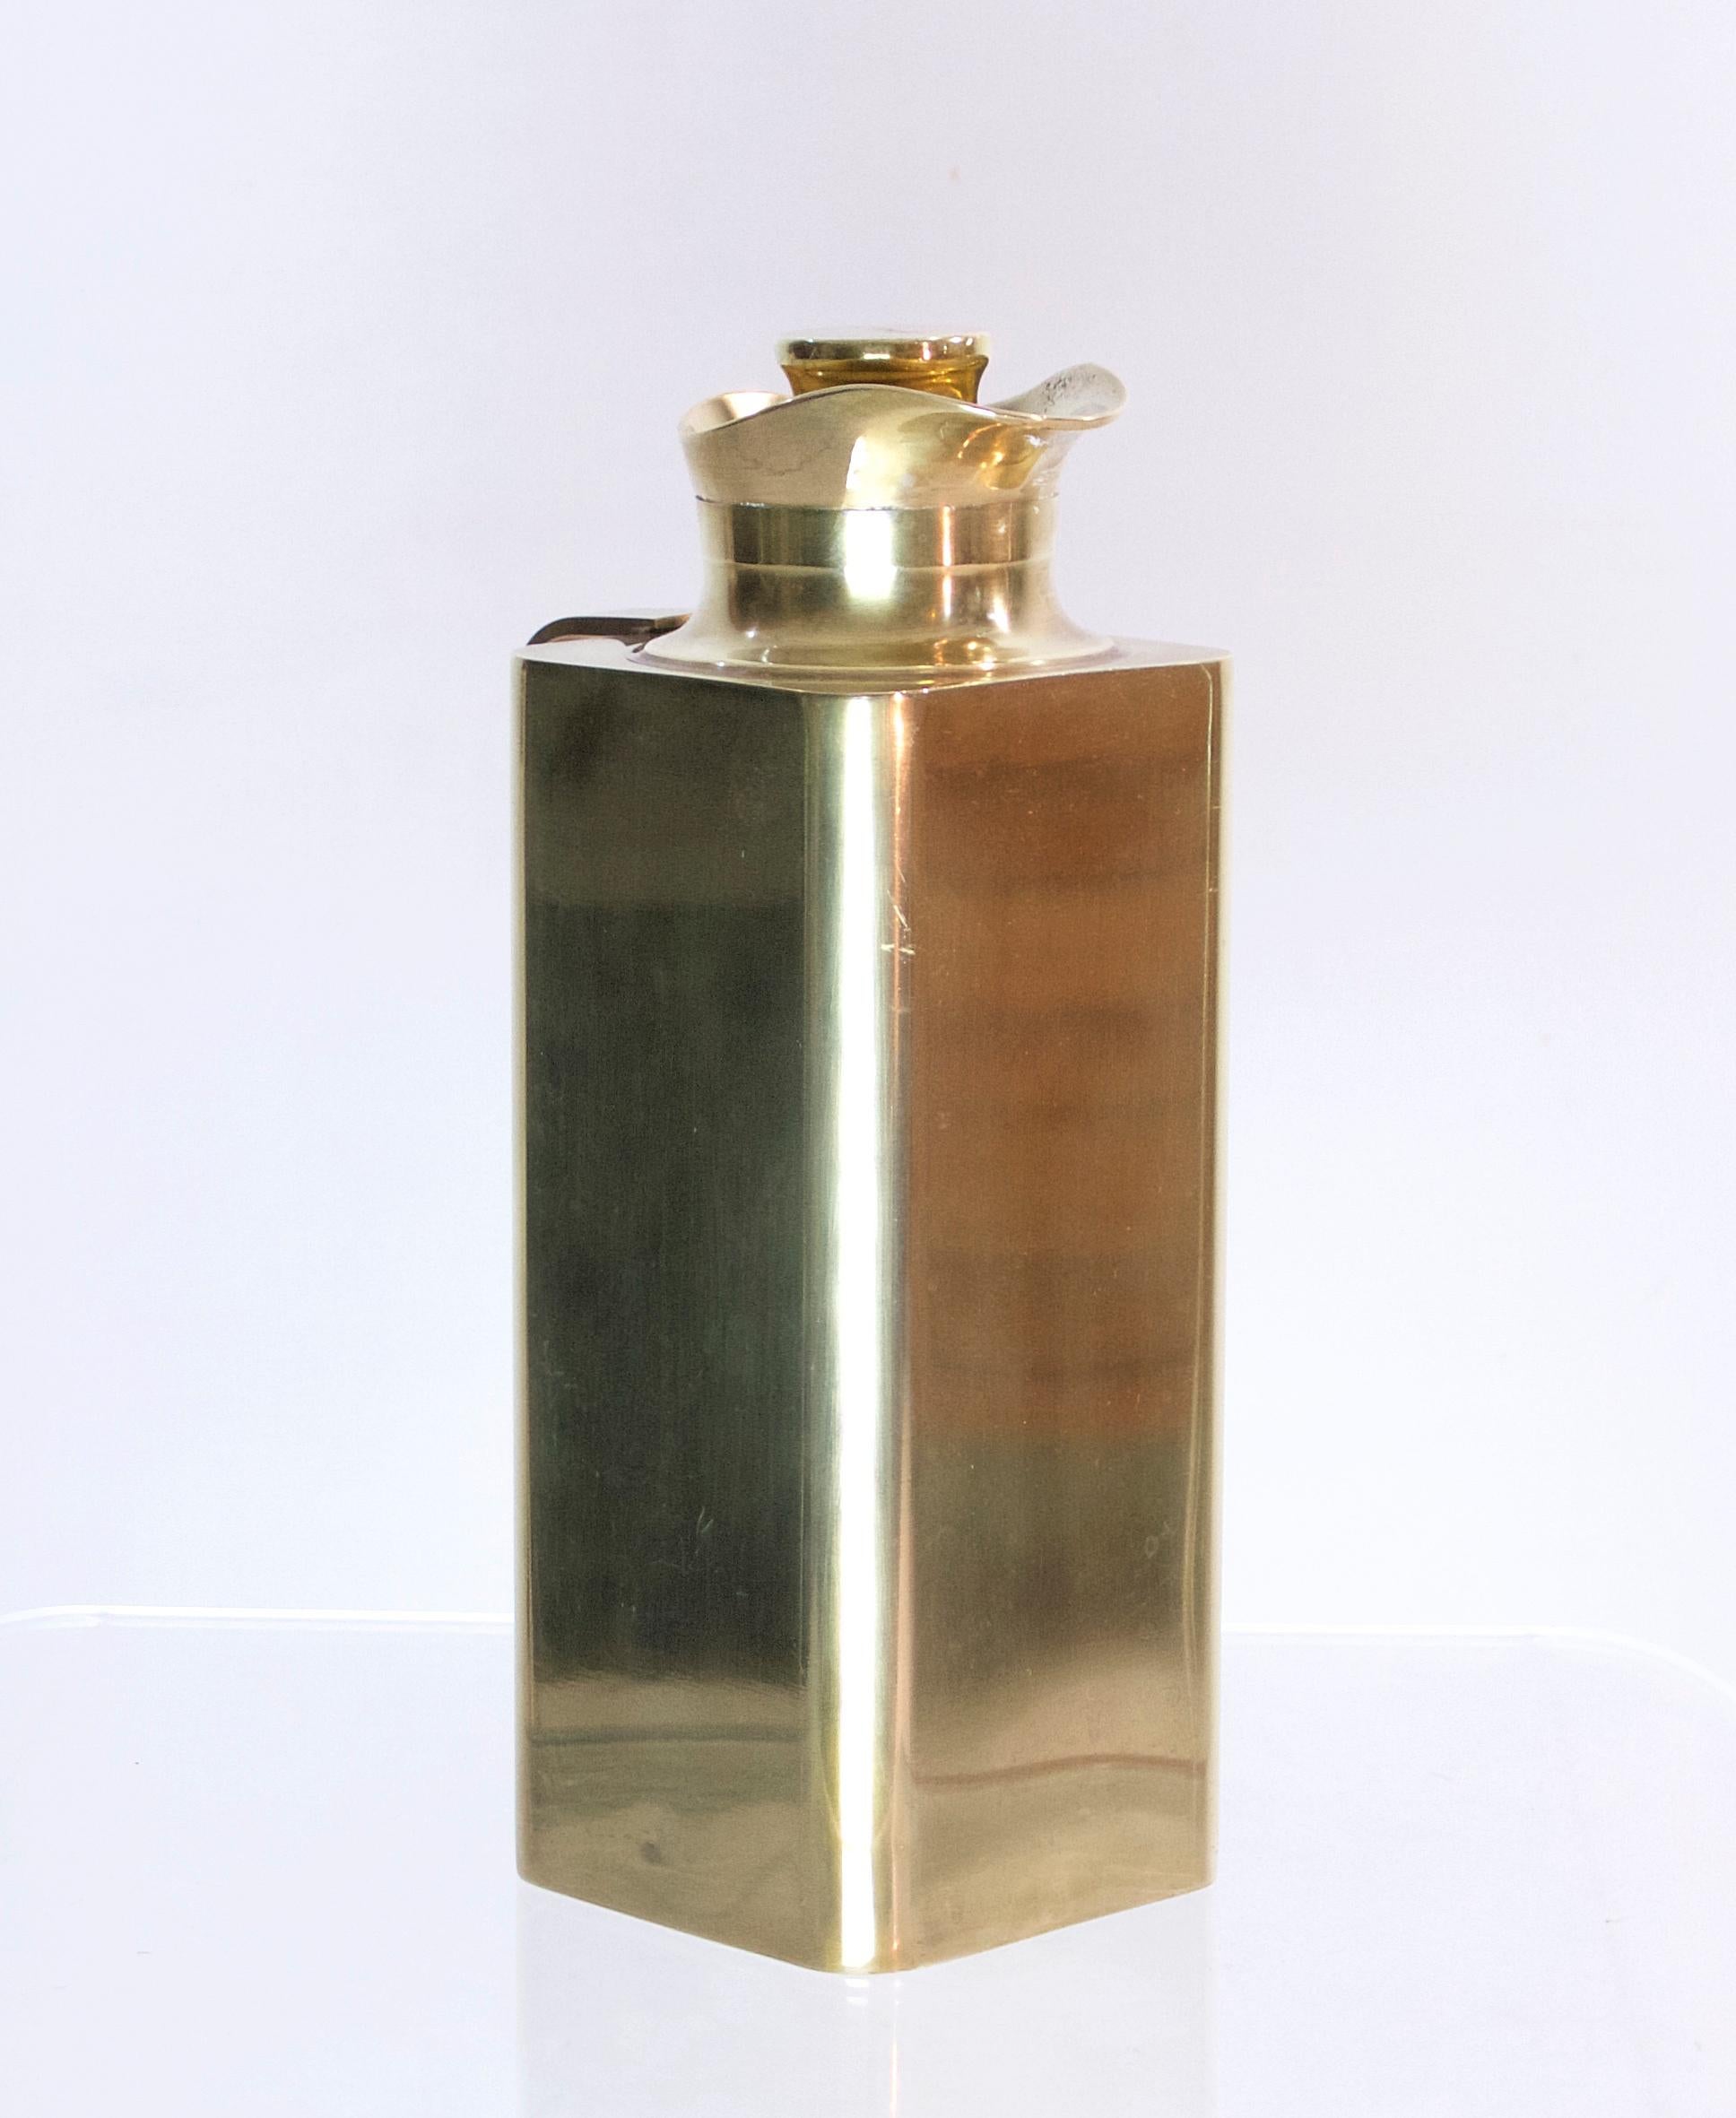 A handmade square thermos for hot or cold drinks by Renzo Cassetti, Italy, in brass. Stamped on top of the lid with Cassetti logo and fatto a mano (meaning handmade). Possible to unscrew the bottom as well.